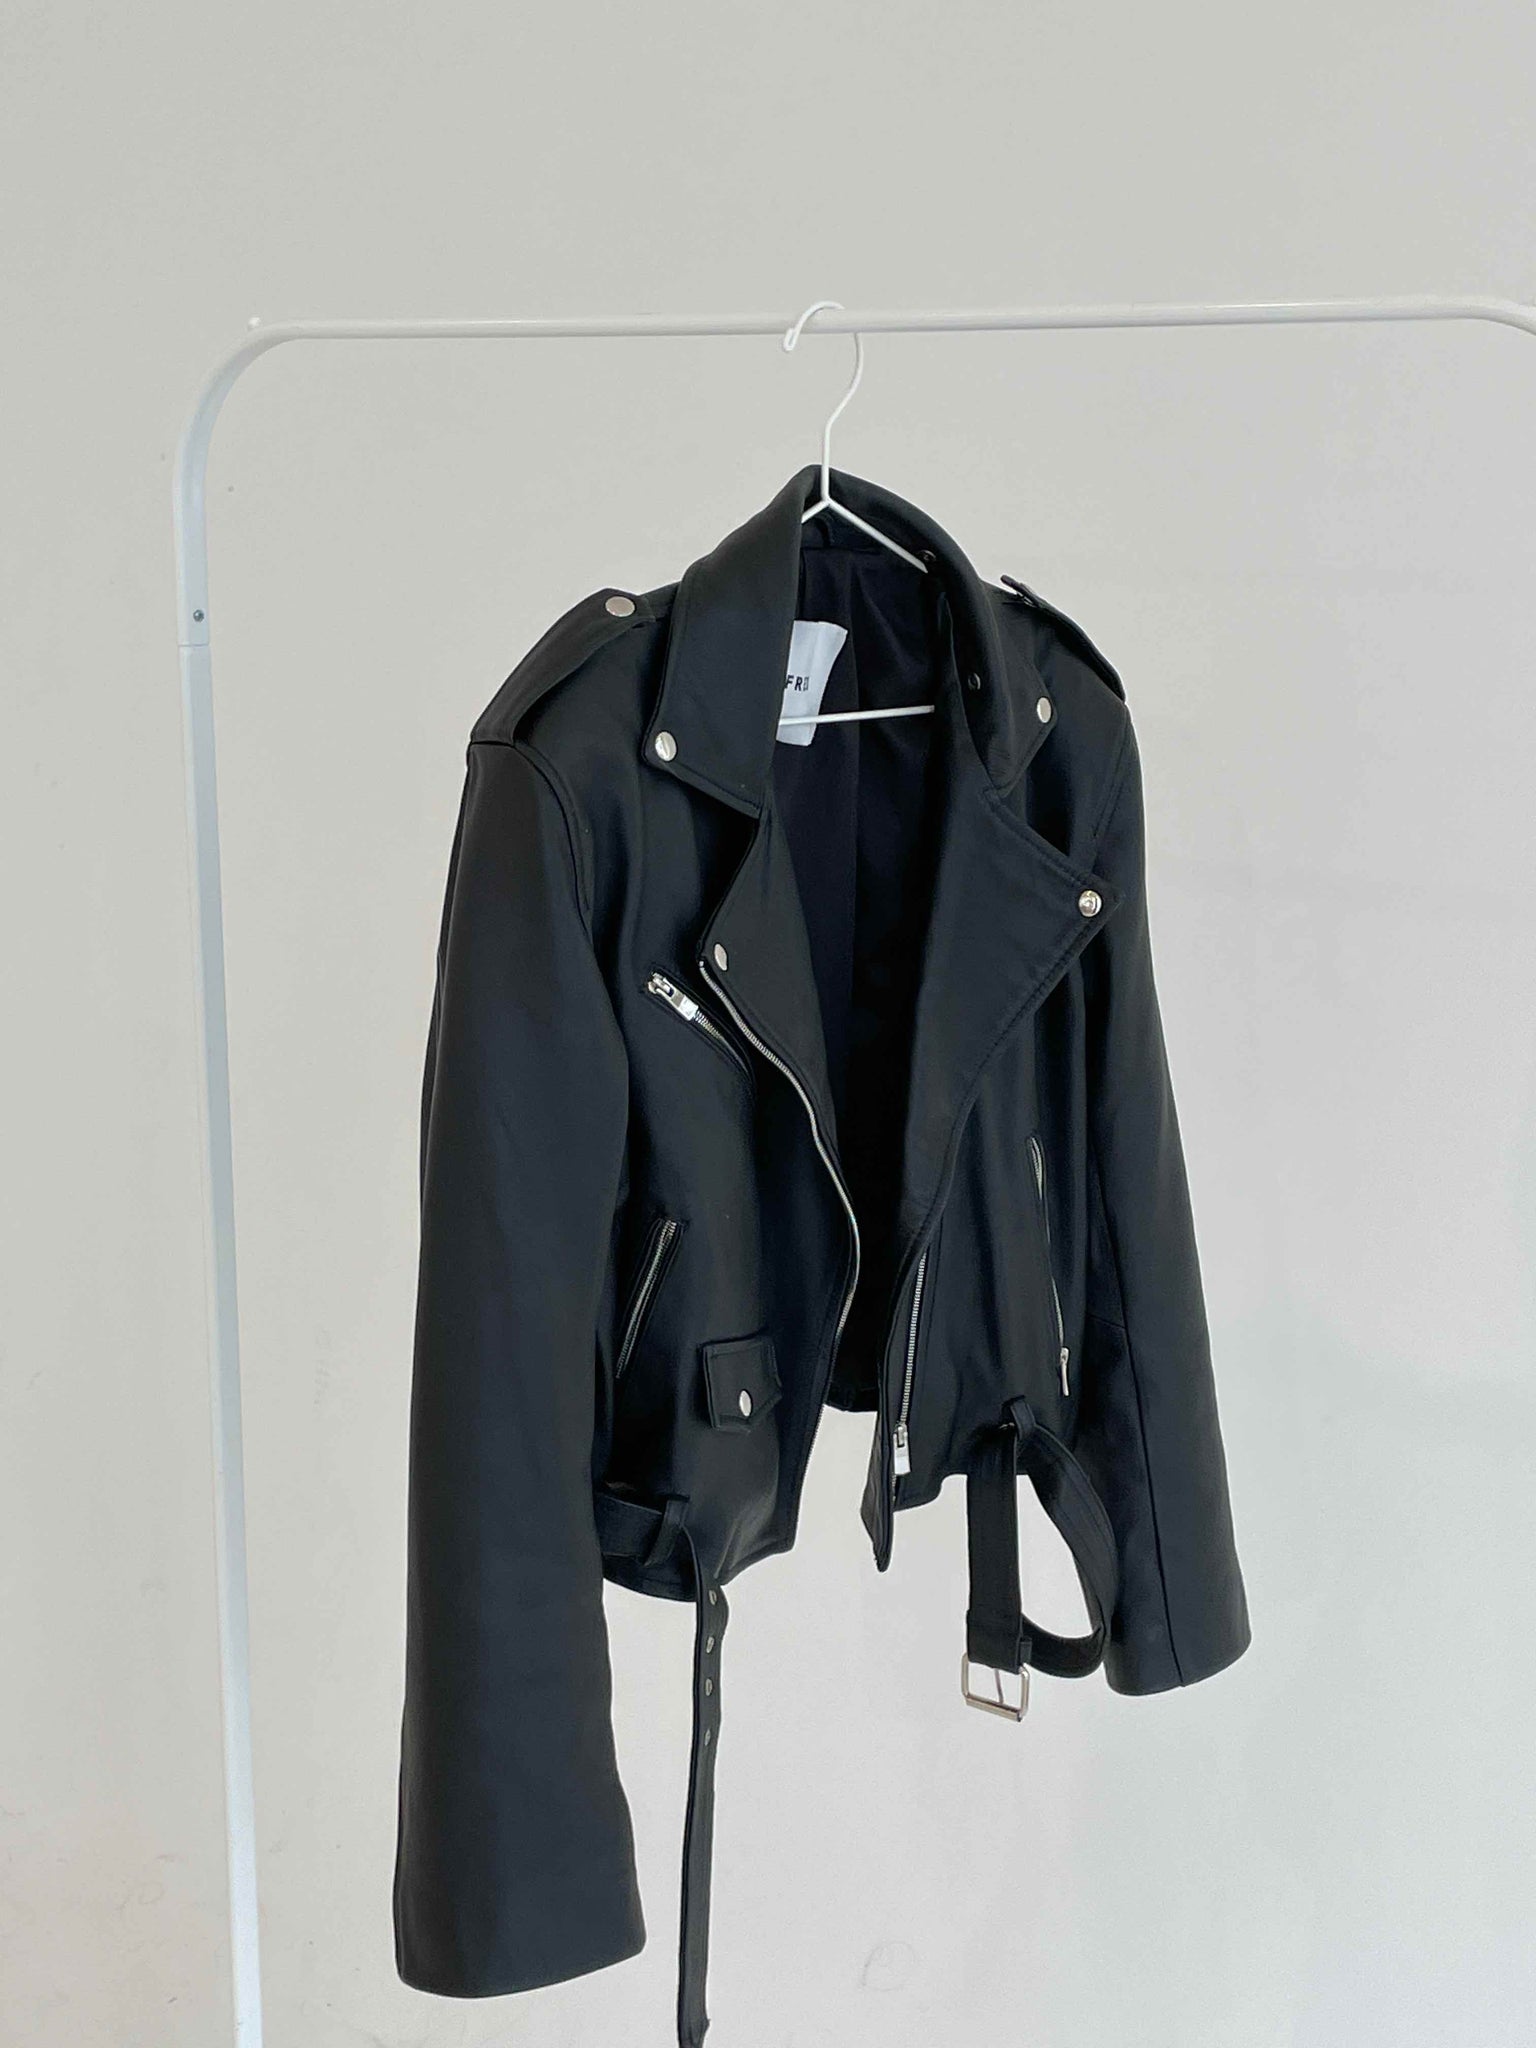 BASIC LEATHER JACKET in BLACK WITH REMOVABLE SHERPA COLLAR